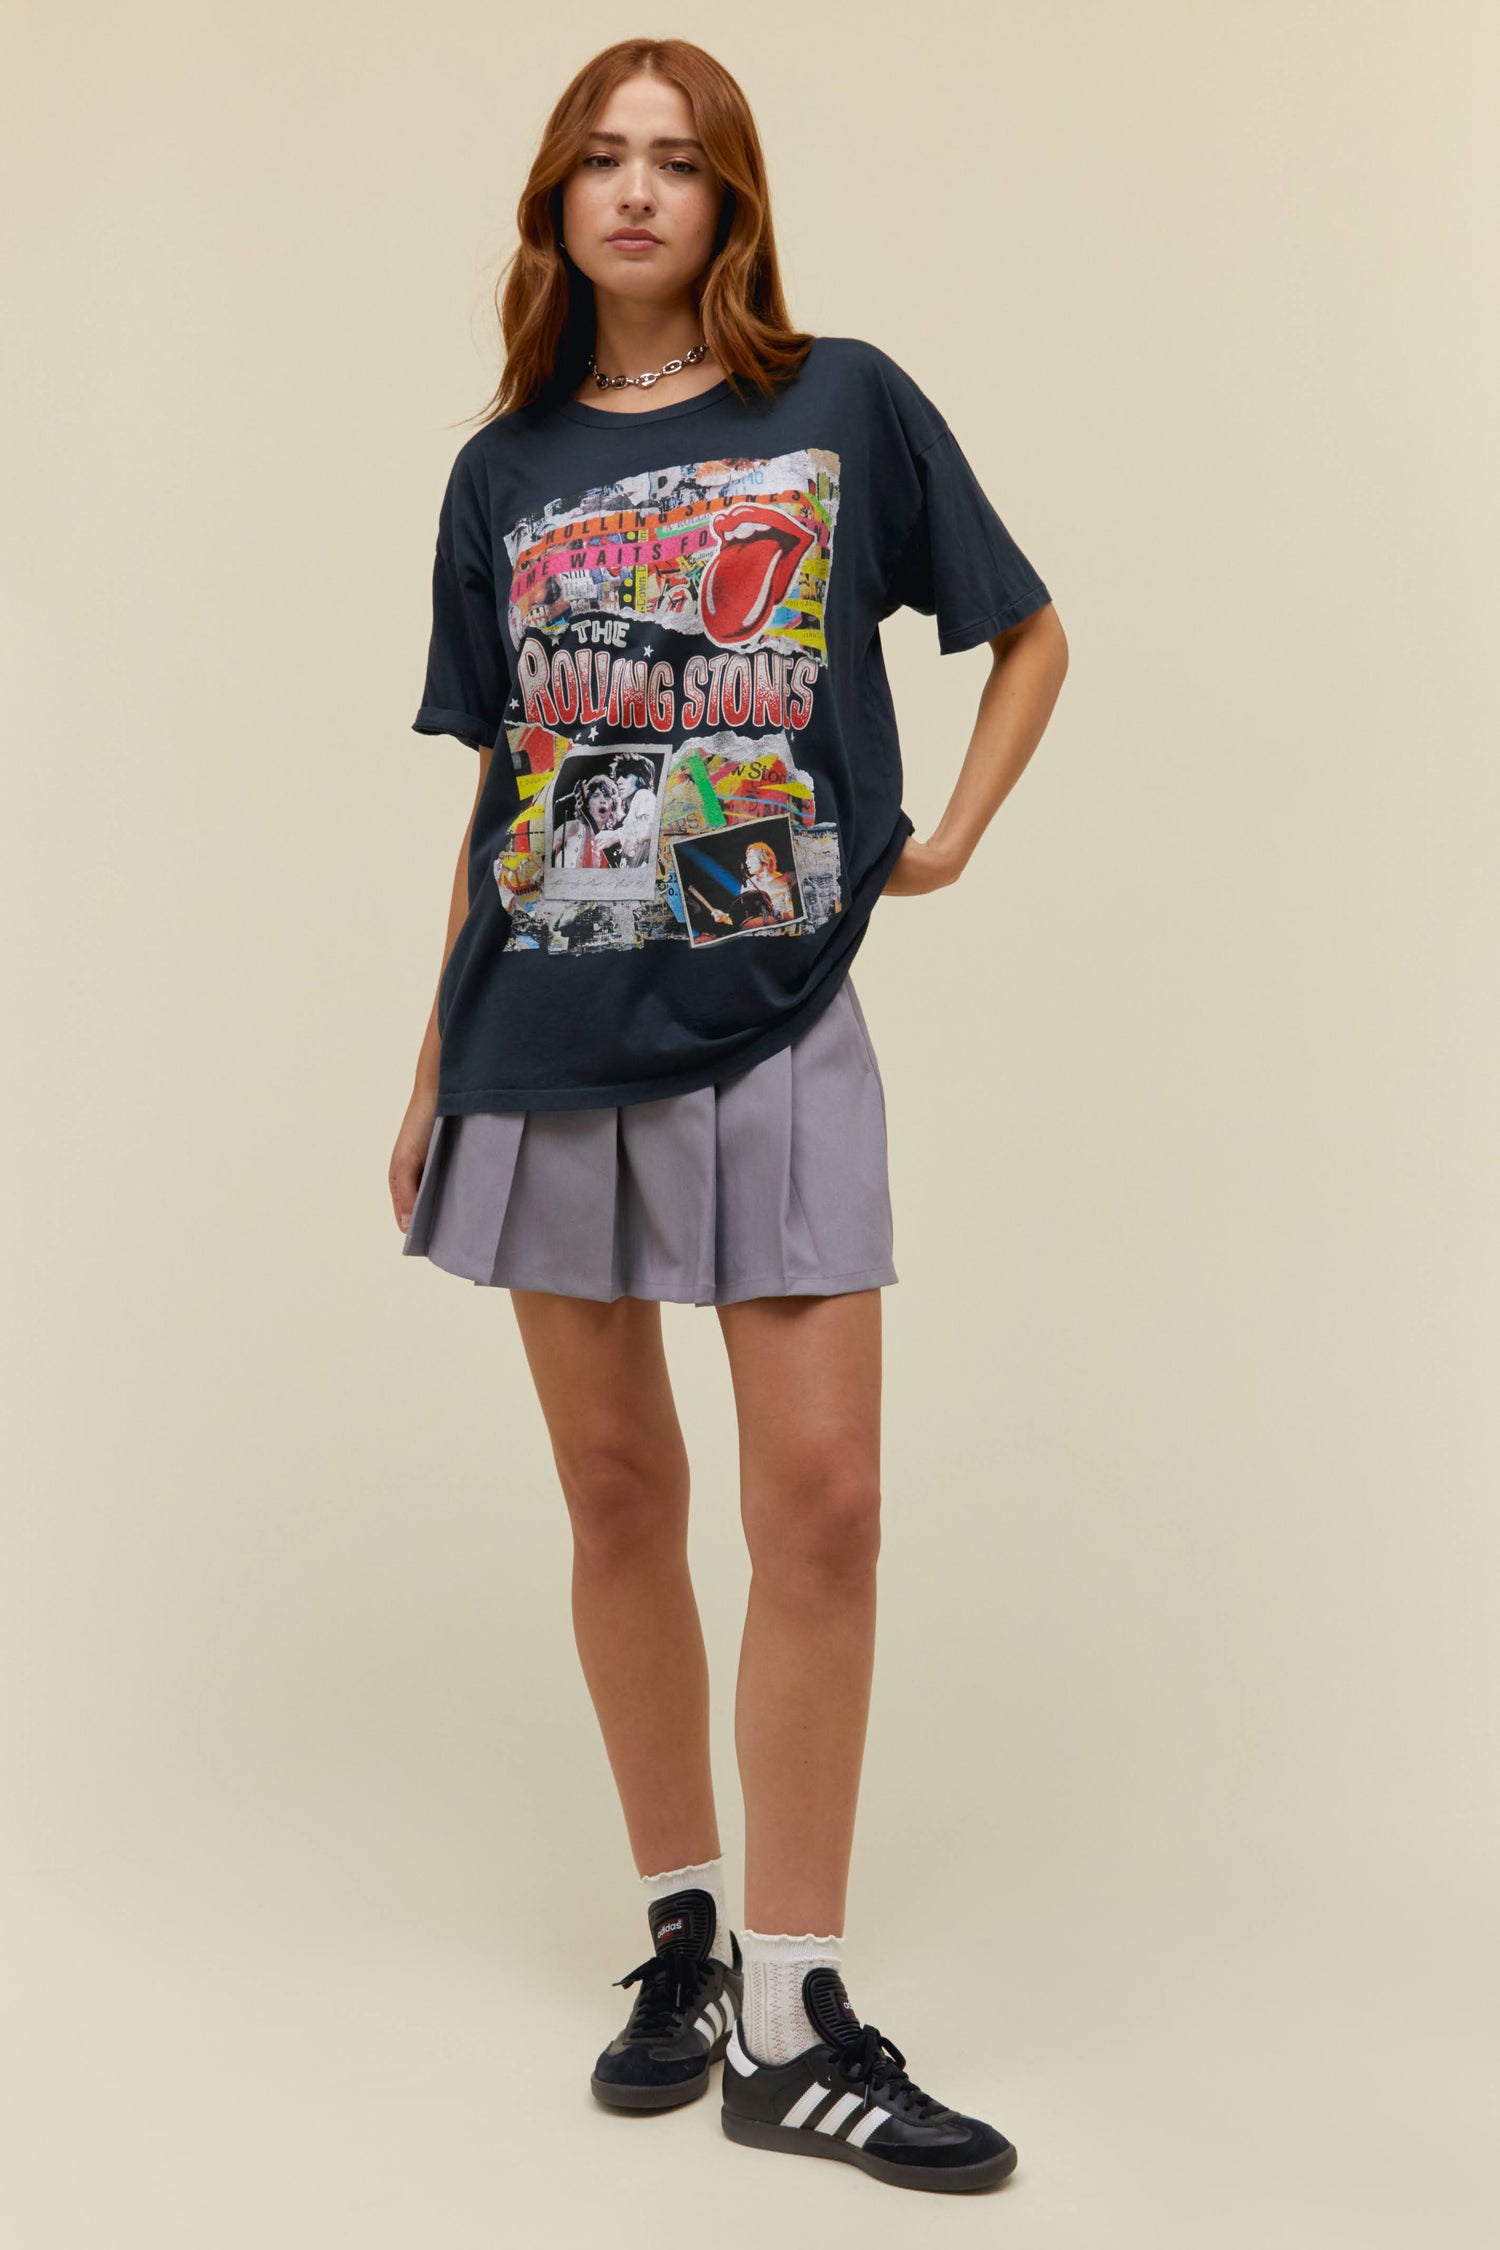 A model featuring a black tee stamped with 'The Rolling Stones' wiith collage pictures of the band performing at concerts.